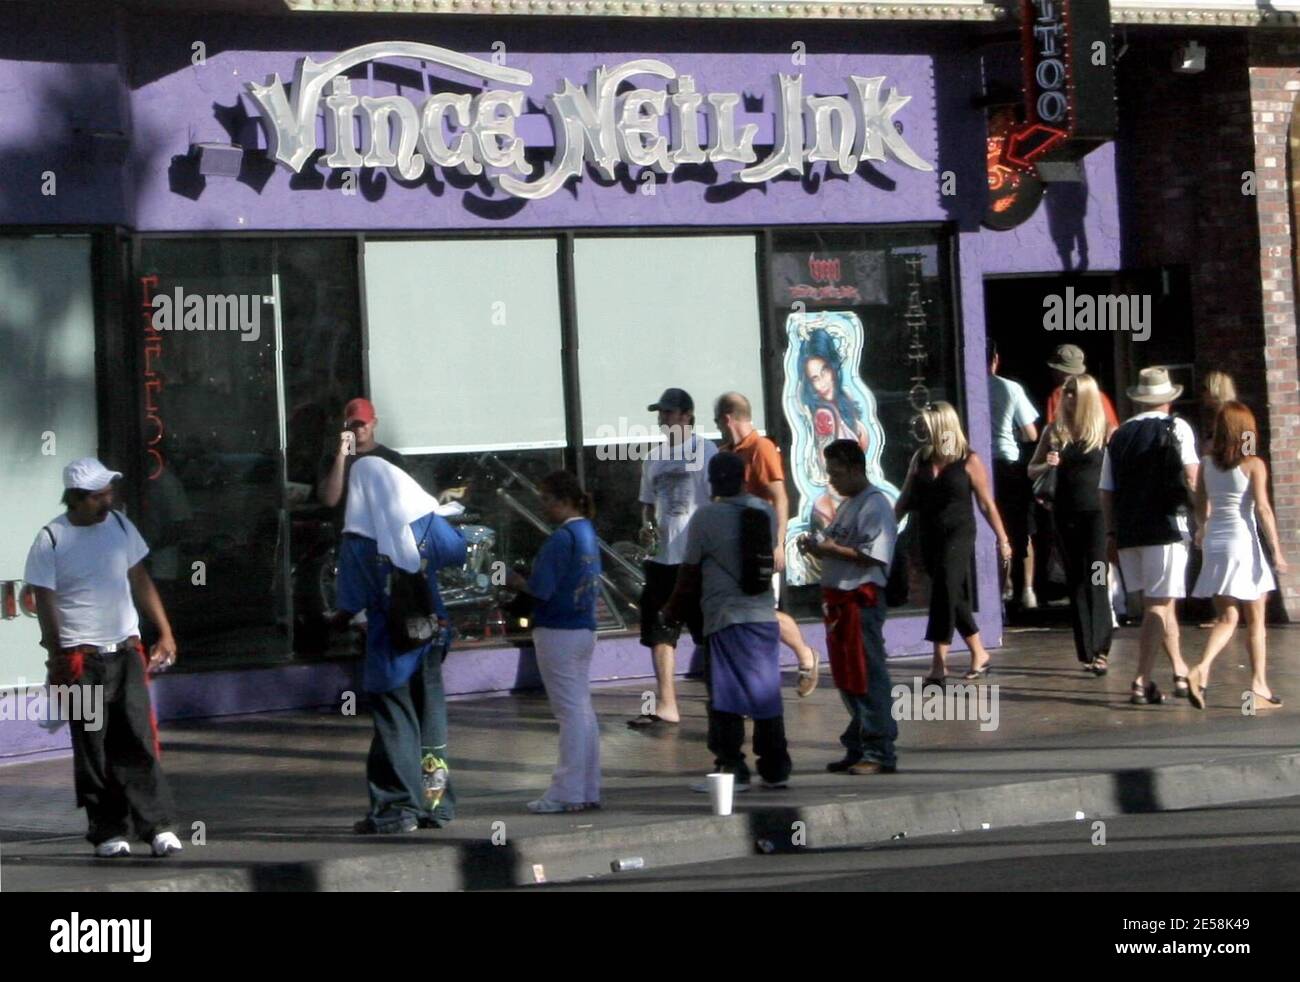 Vince Neil Ink in Las Vegas, NV. 9/7/07. [[ral]] Stock Photo - Alamy